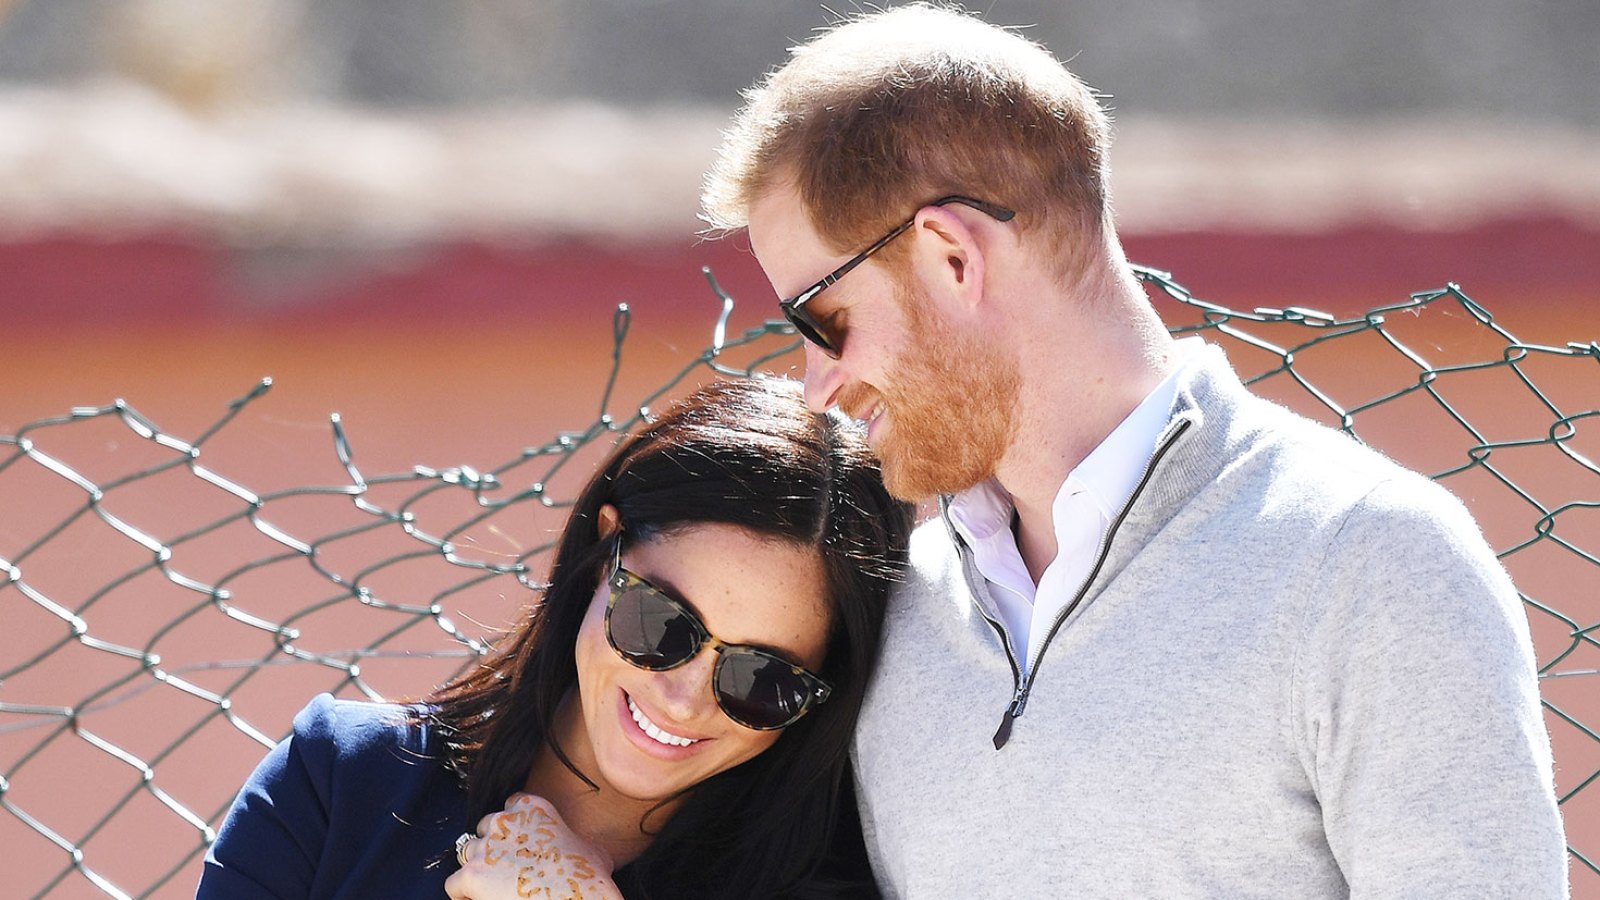 Duchess Meghan and Prince Harry Ask Fans to Honor Their Royal Baby With Donations to These Charities Prince Harry, Duke of Sussex and Meghan, Duchess of Sussex